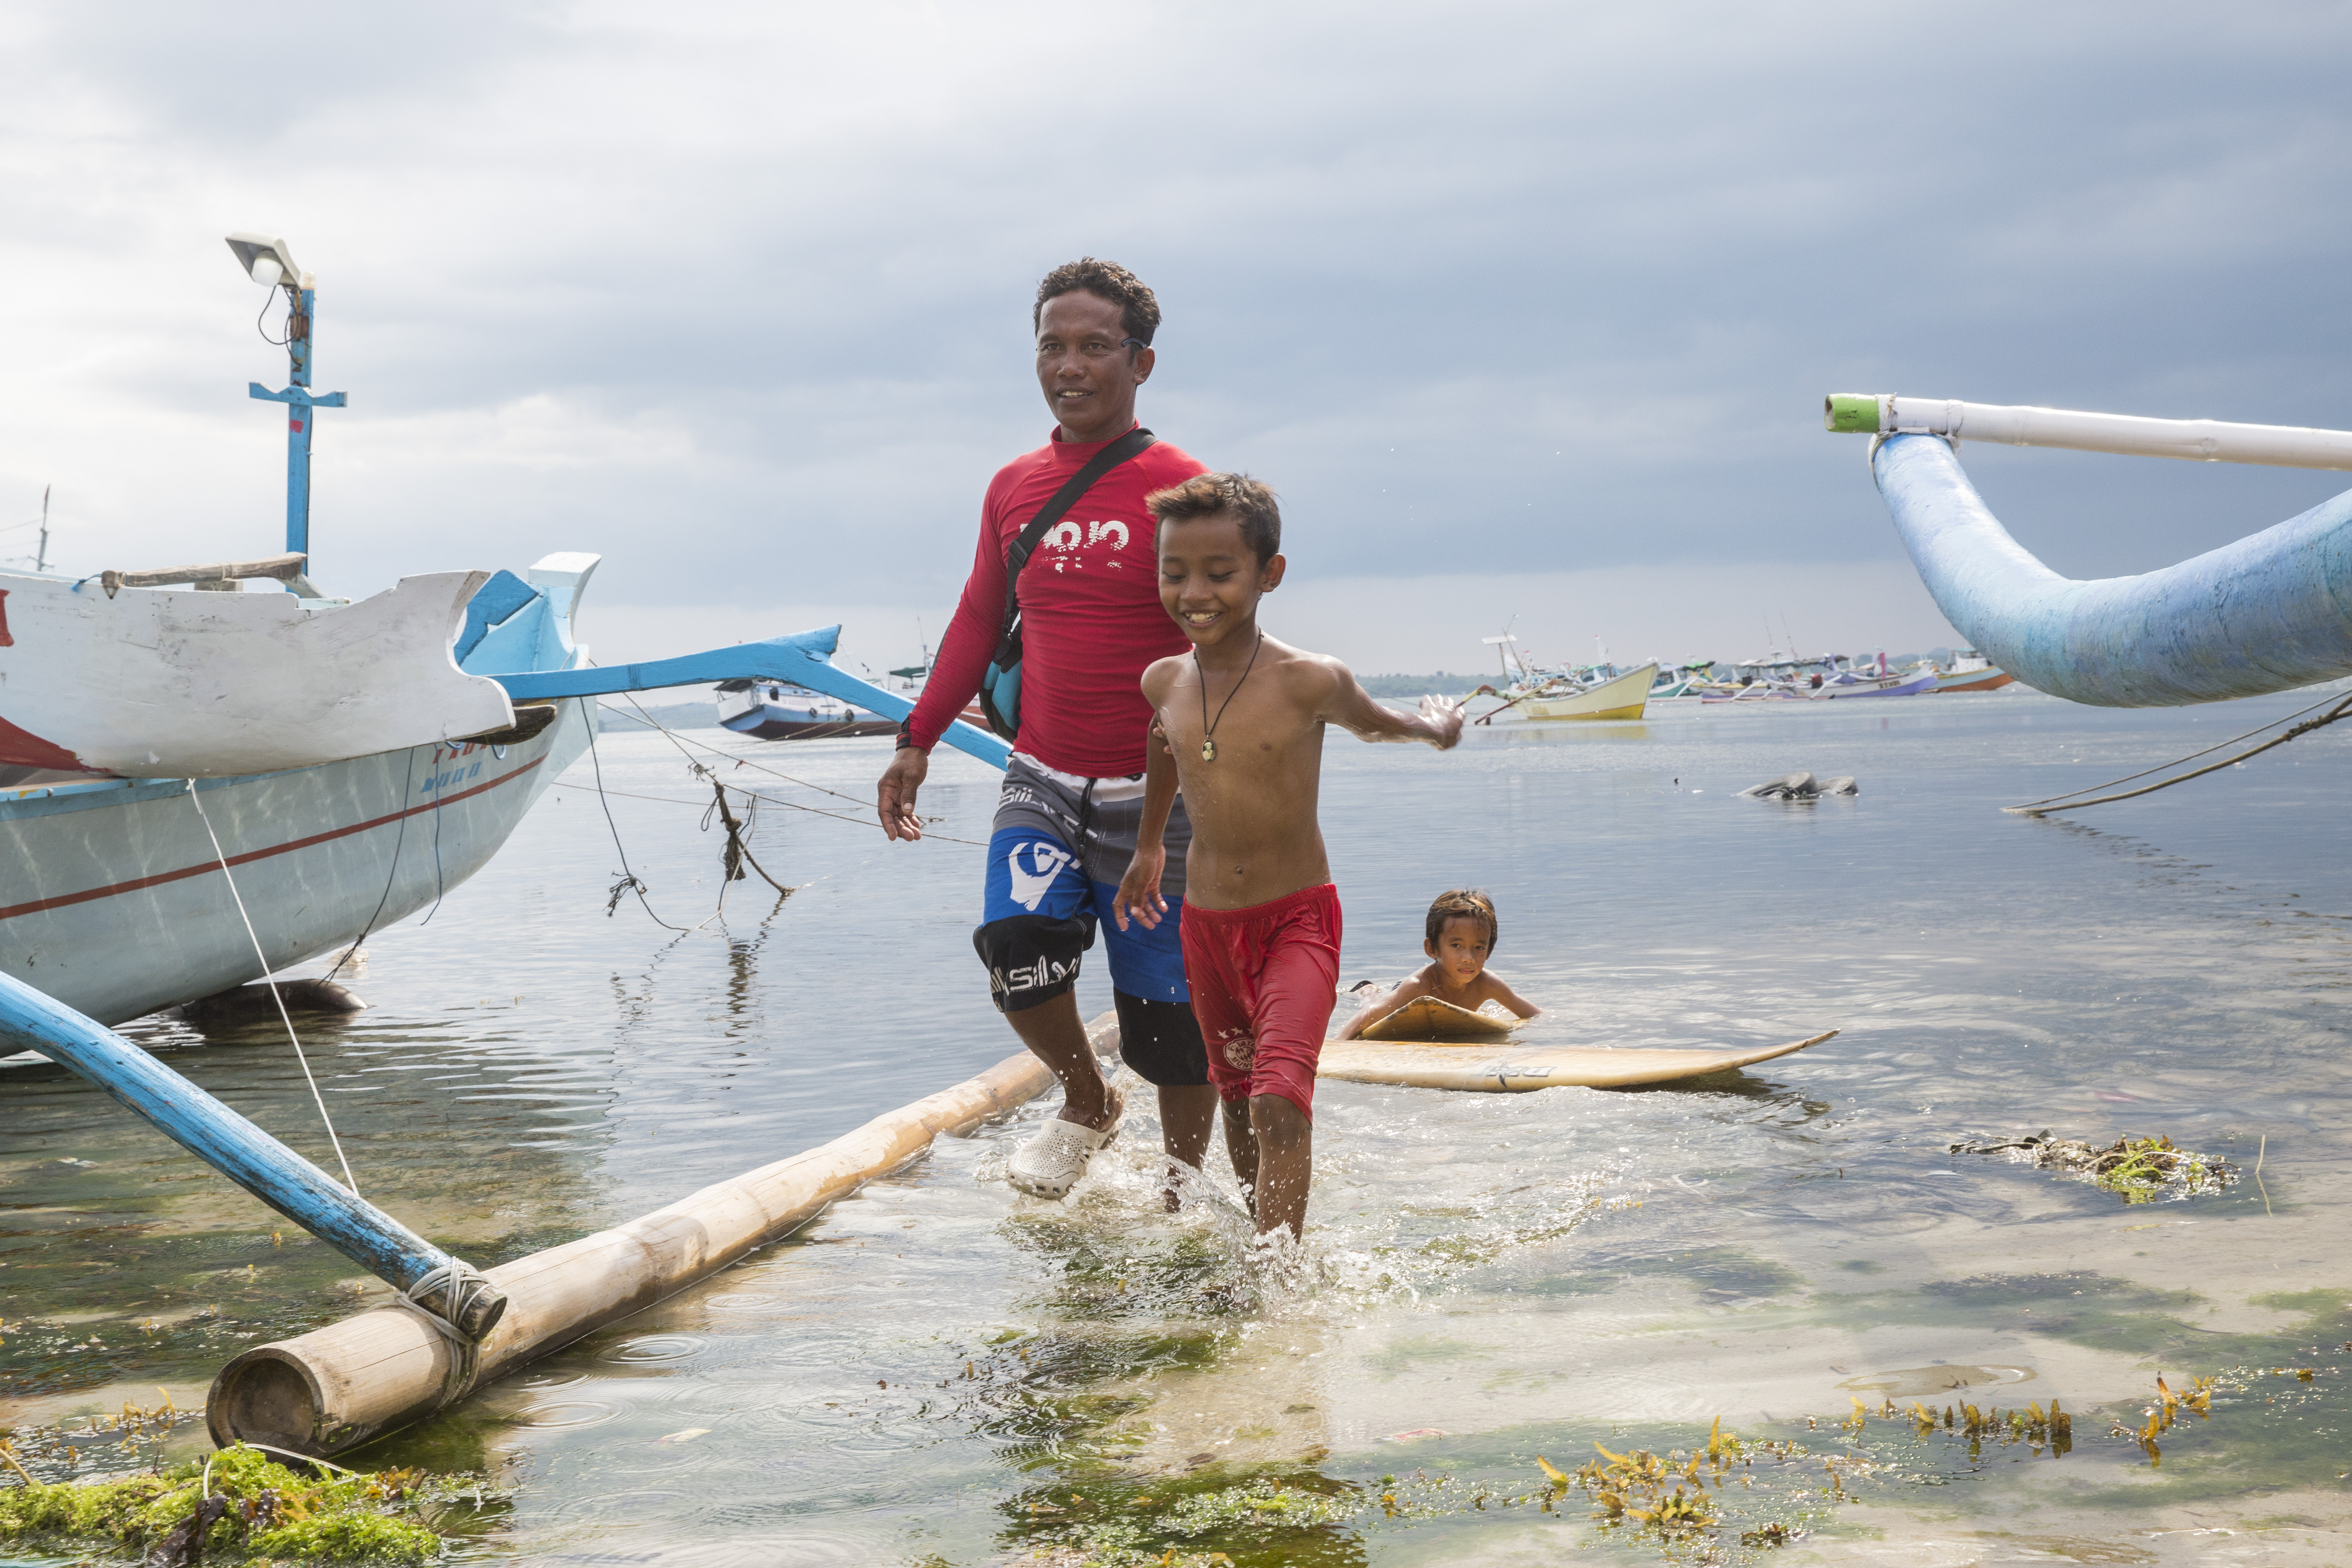 Suhardi's son loves the sea like his father does. Being an eco-guide has allowed Suhardi to spend more time with his son instead of being out at sea for prolonged periods.